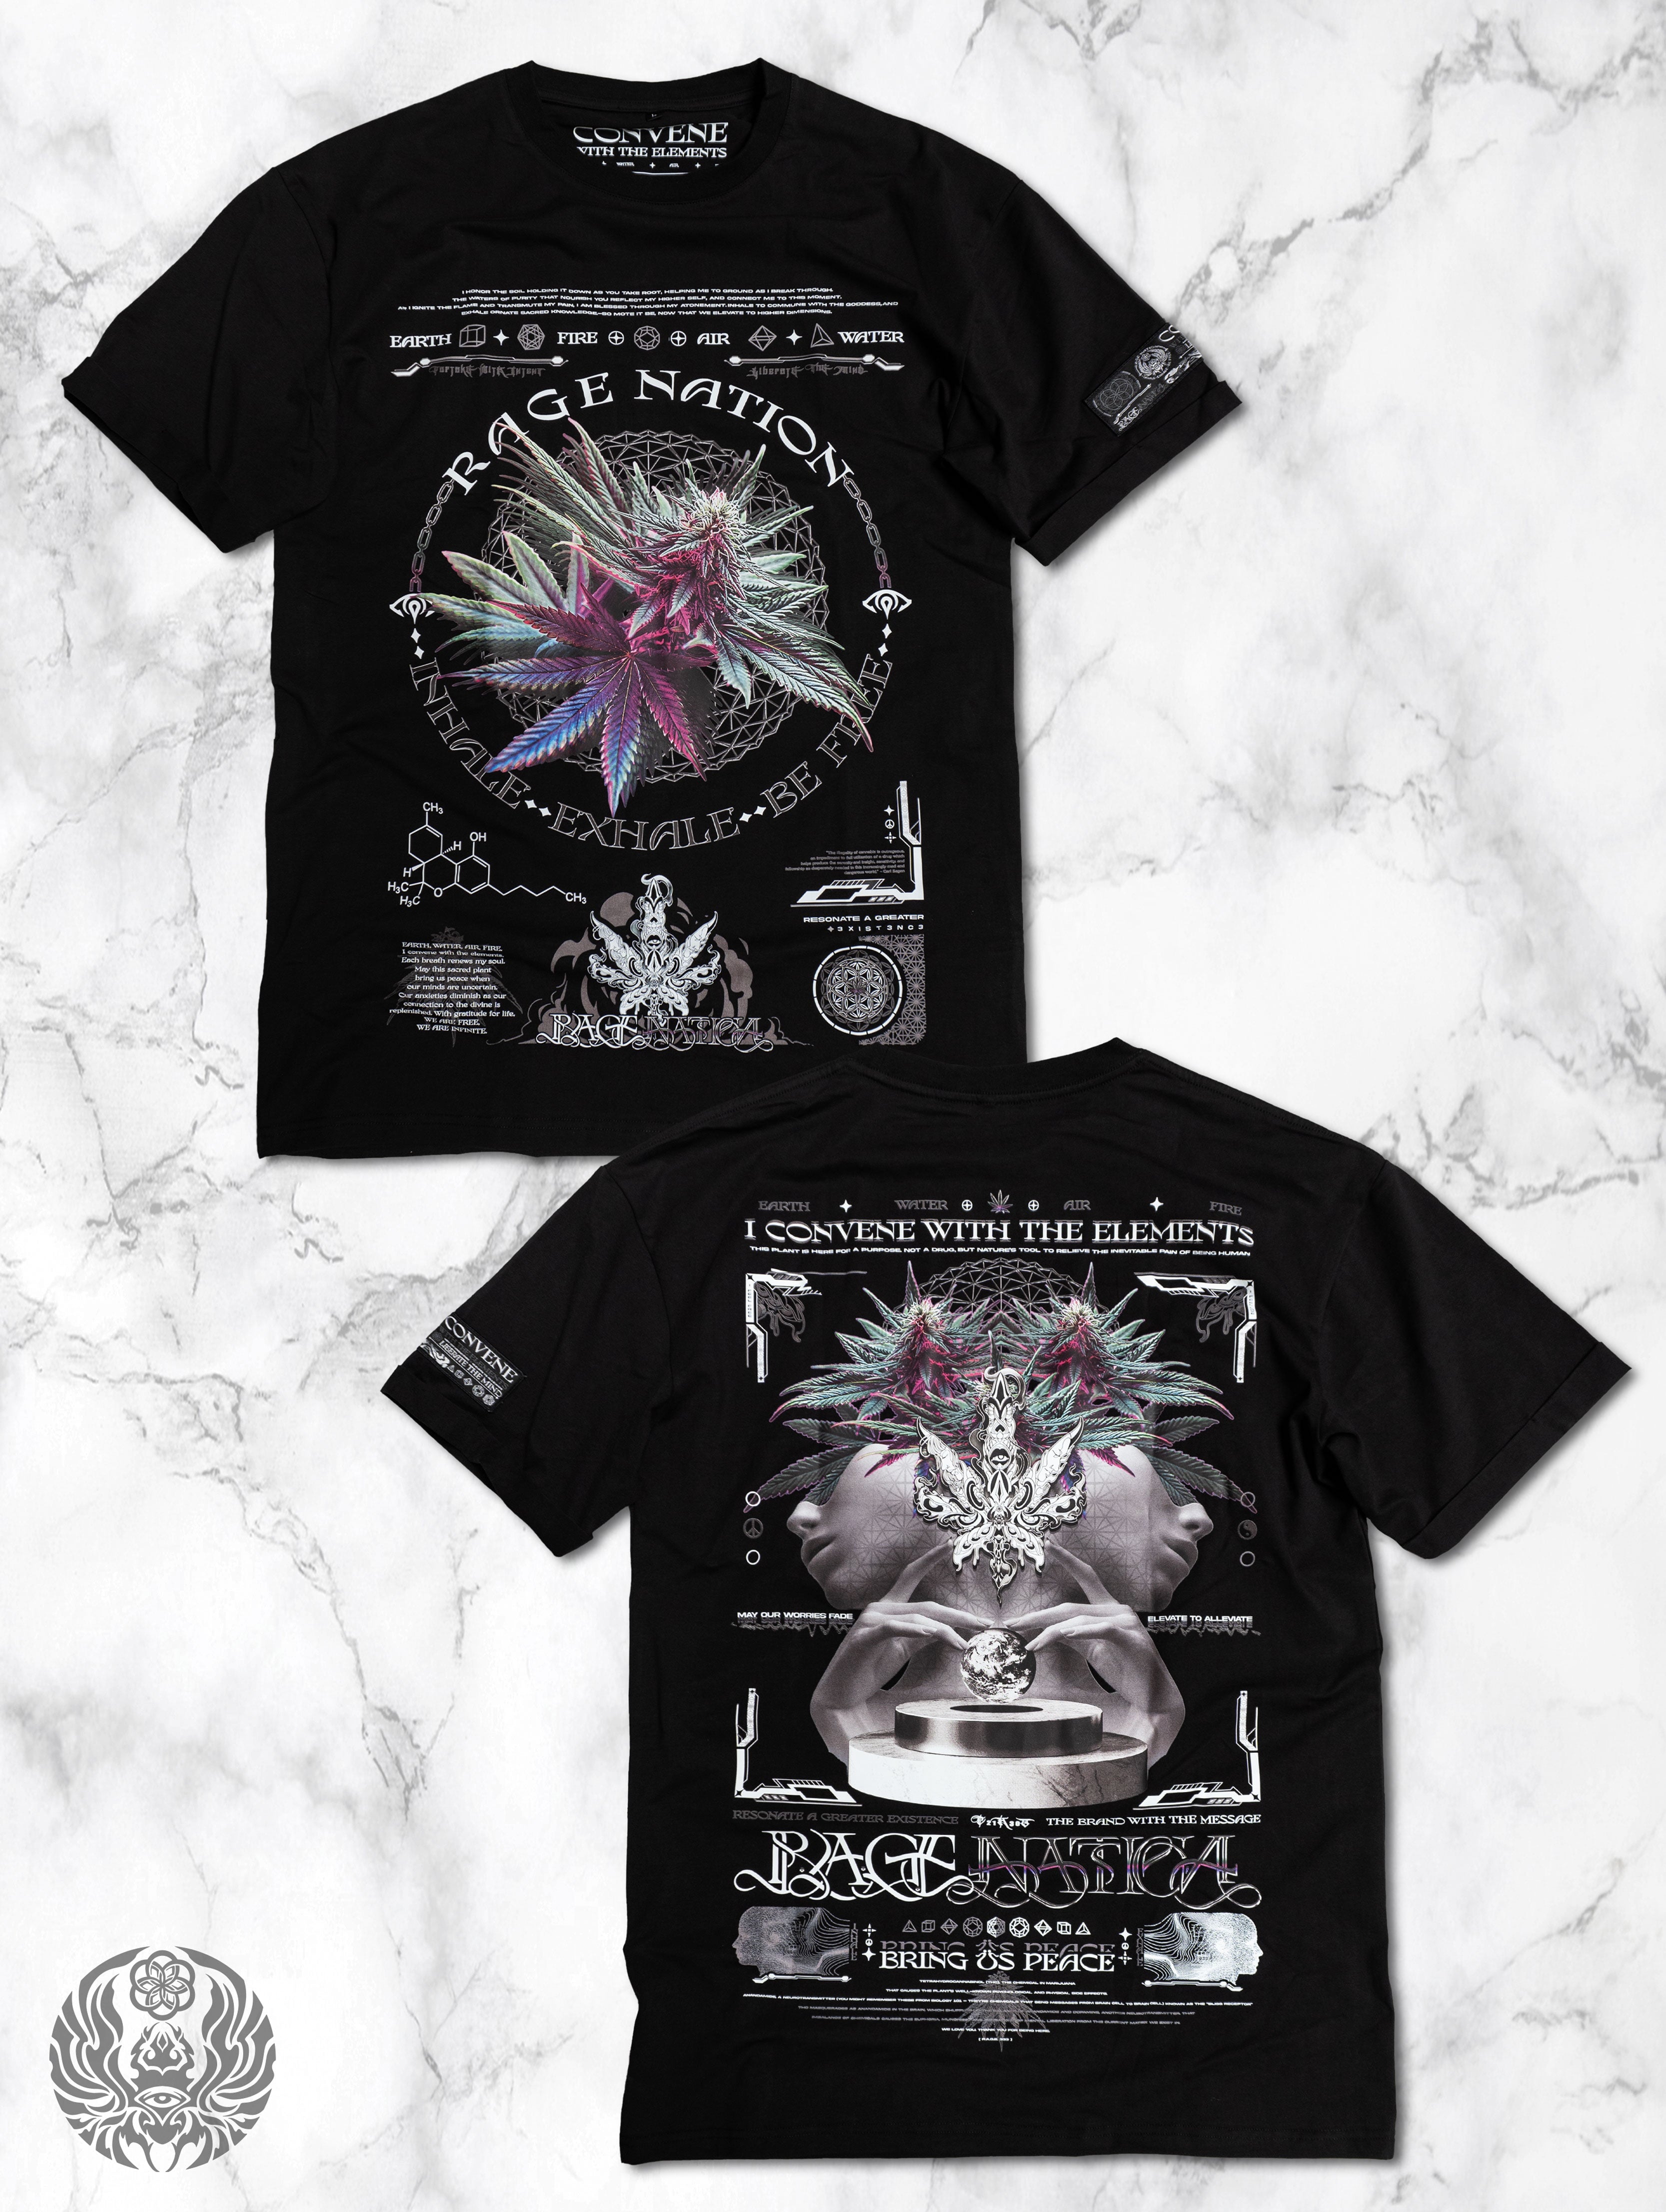 COMING SOON • CONVENE WITH THE ELEMENTS • Premium T-Shirt T-Shirt 